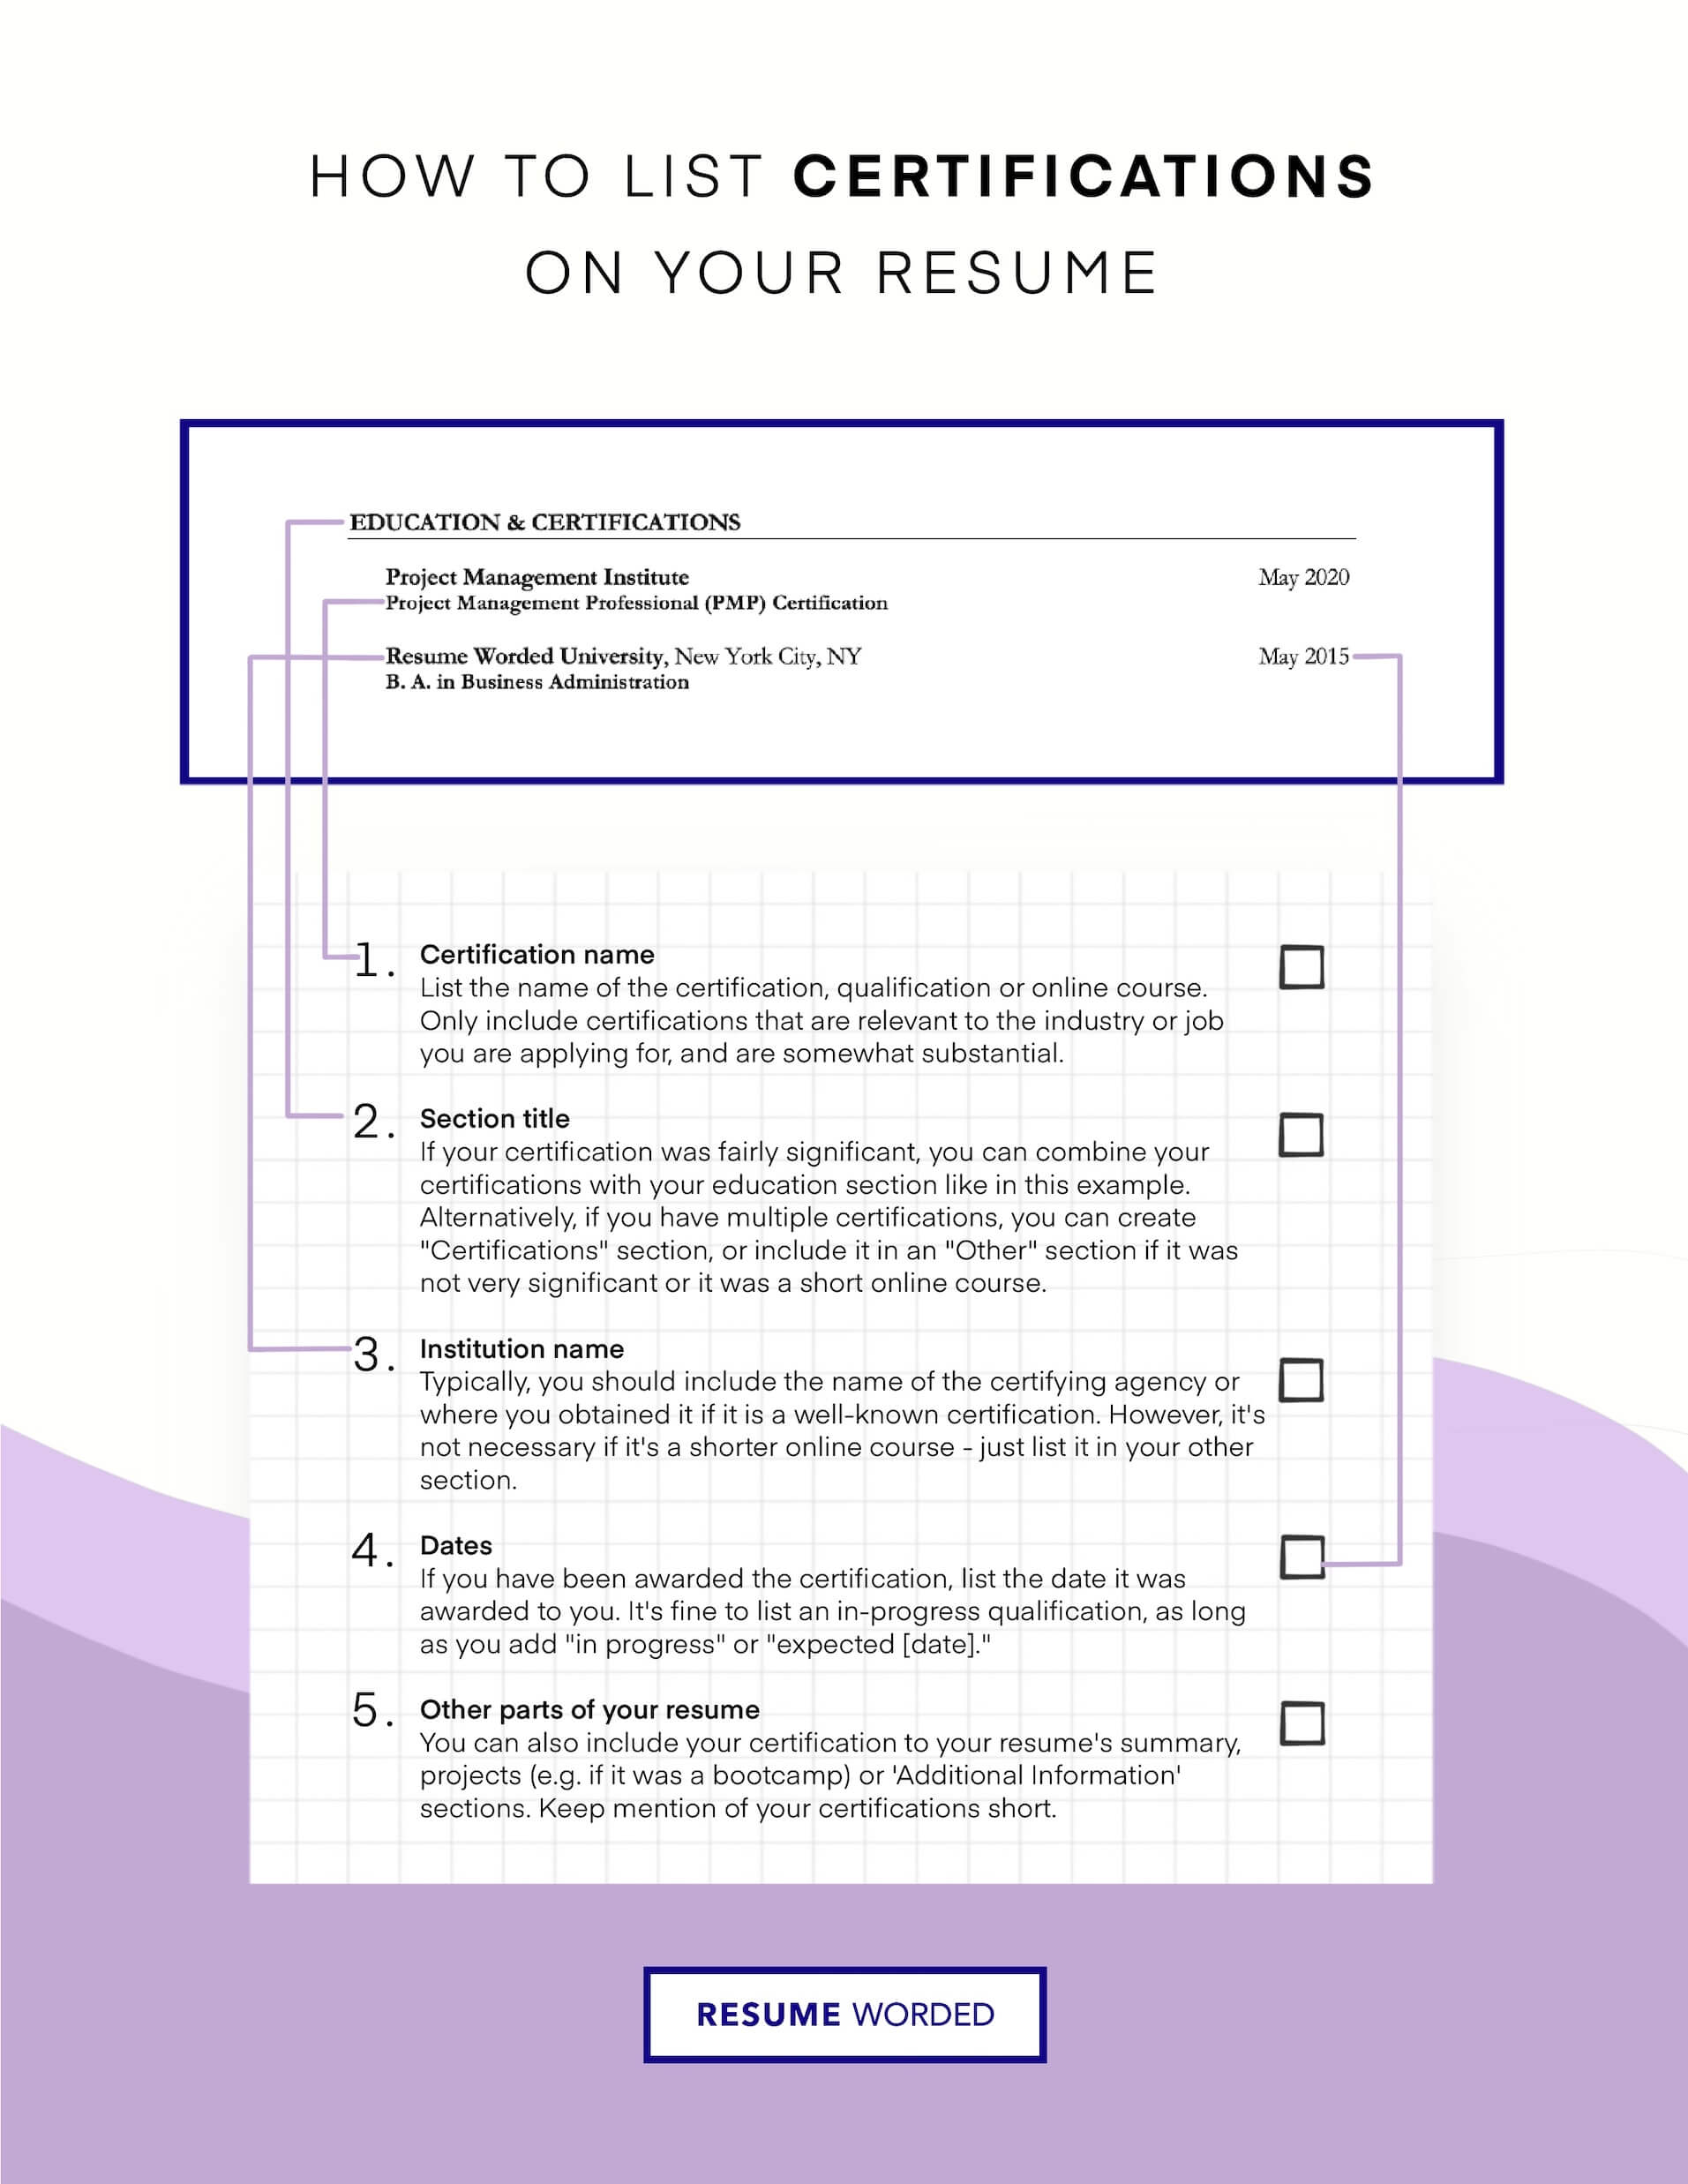 Include relevant professional licenses and certifications - Lawyer CV